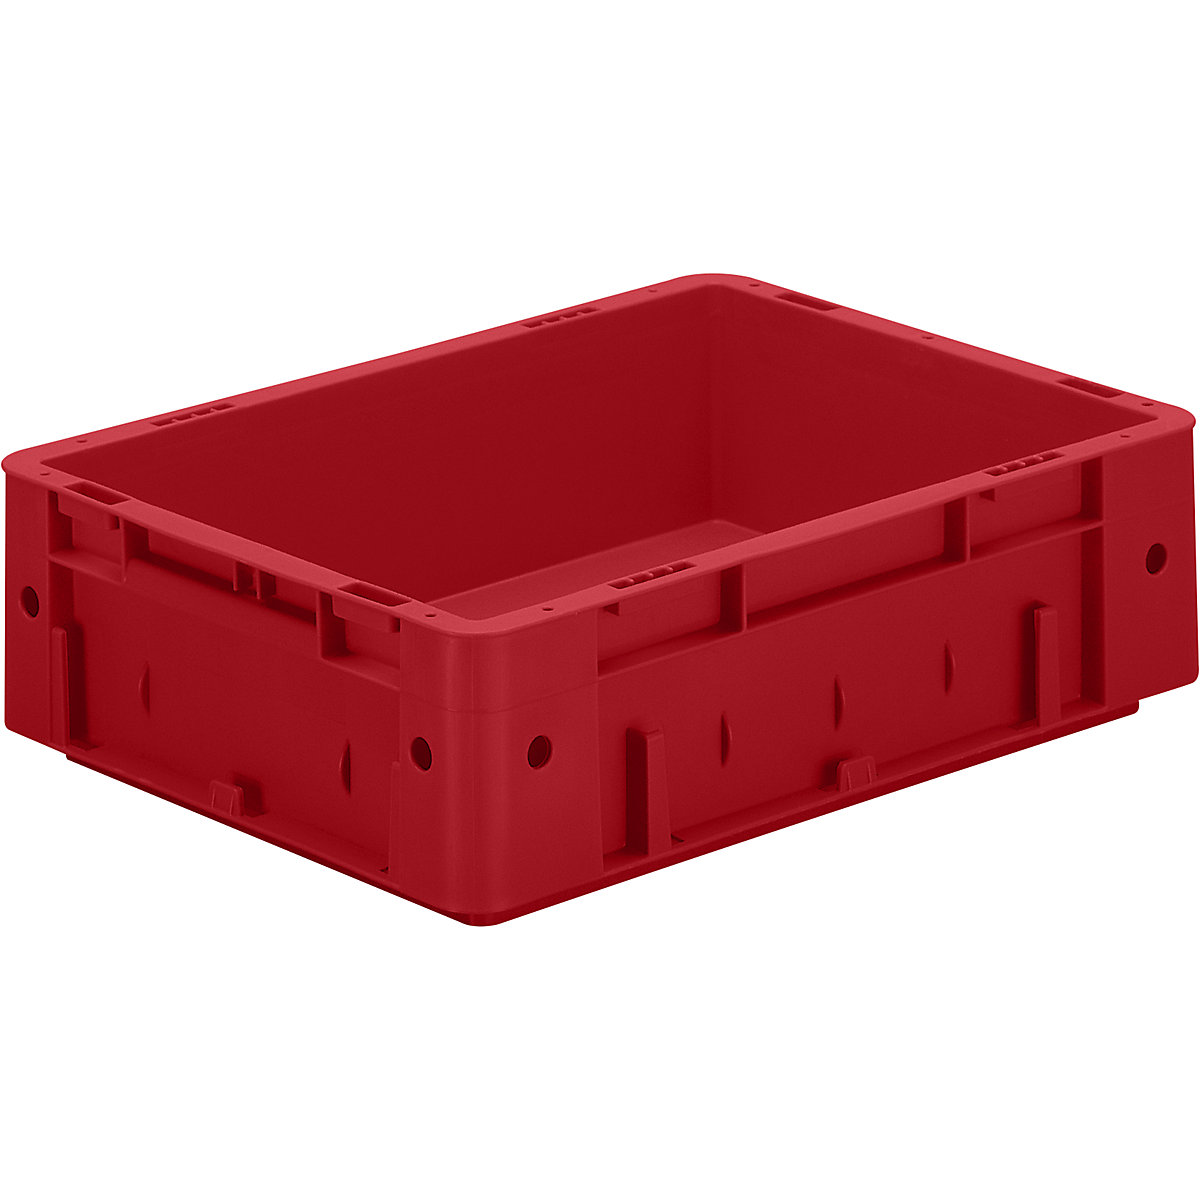 Heavy duty Euro container, polypropylene, capacity 9.2 l, LxWxH 400 x 300 x 120 mm, solid walls, solid base, red, pack of 4-5